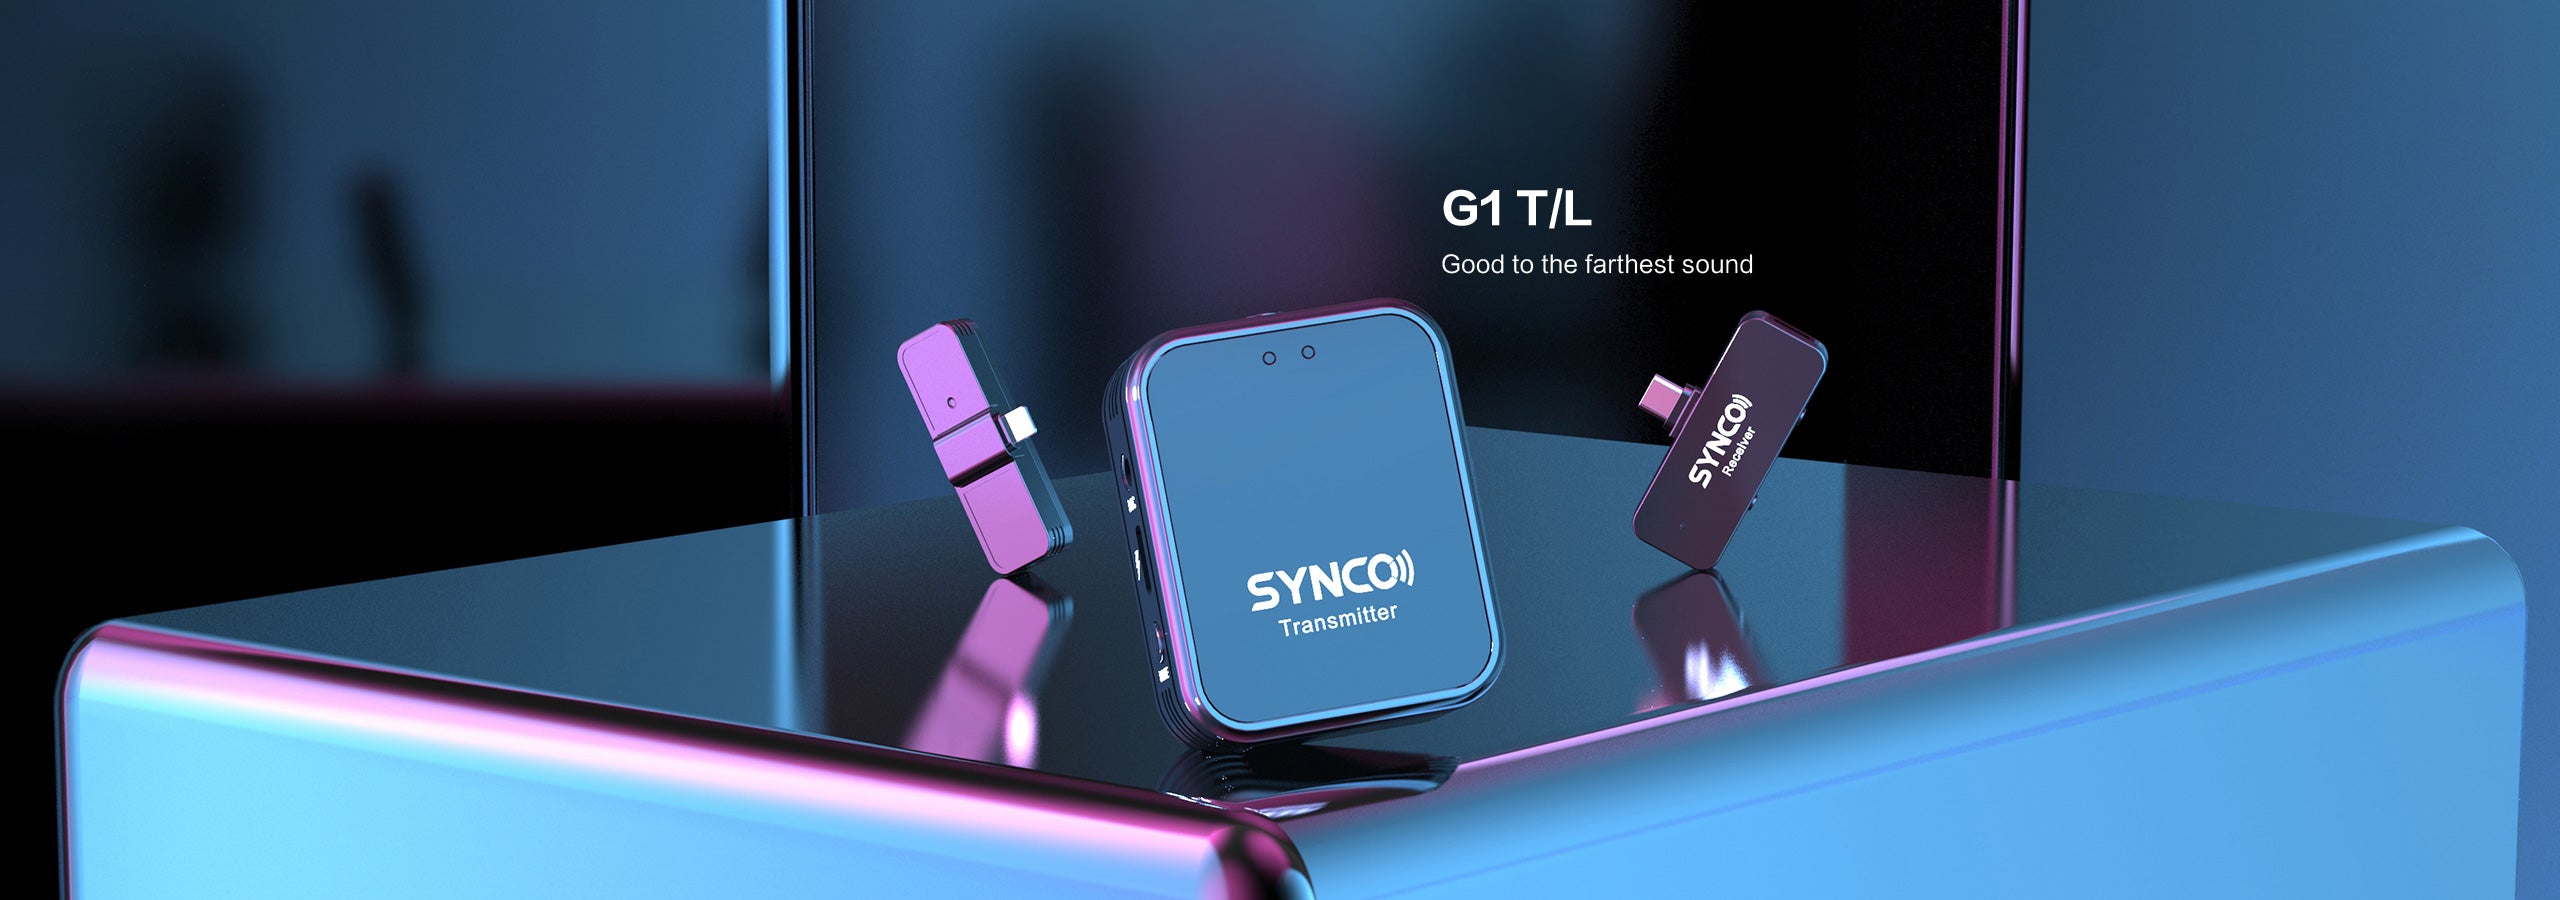 SYNCO G1T & G1L mini microphone wireless for smartphones includes a transmitter and a receiver with Lightning or Type-C connector.